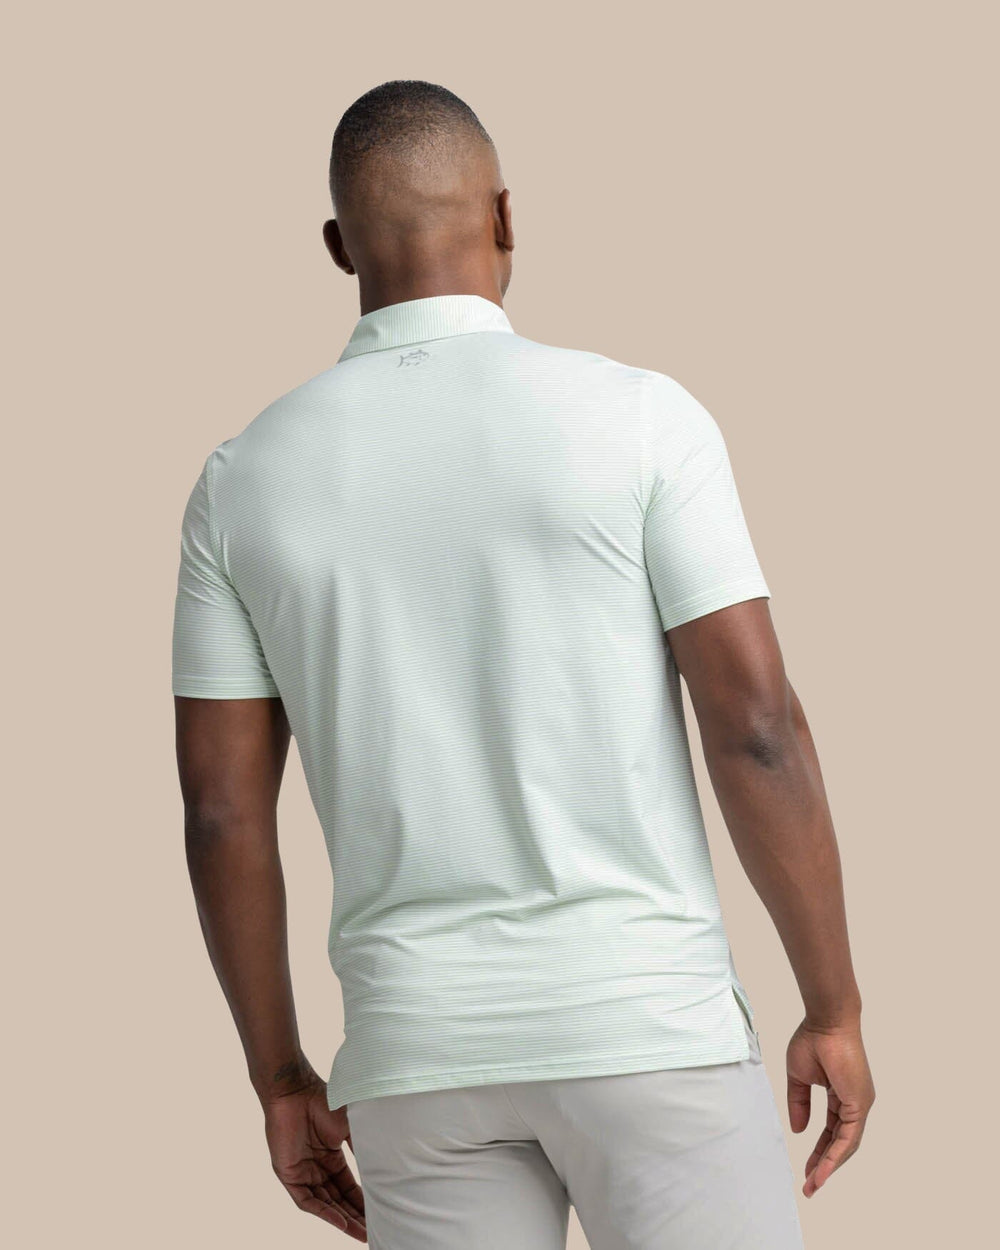 The back view of the Southern Tide brrr-eeze Meadowbrook Stripe Polo by Southern Tide - Smoke Green